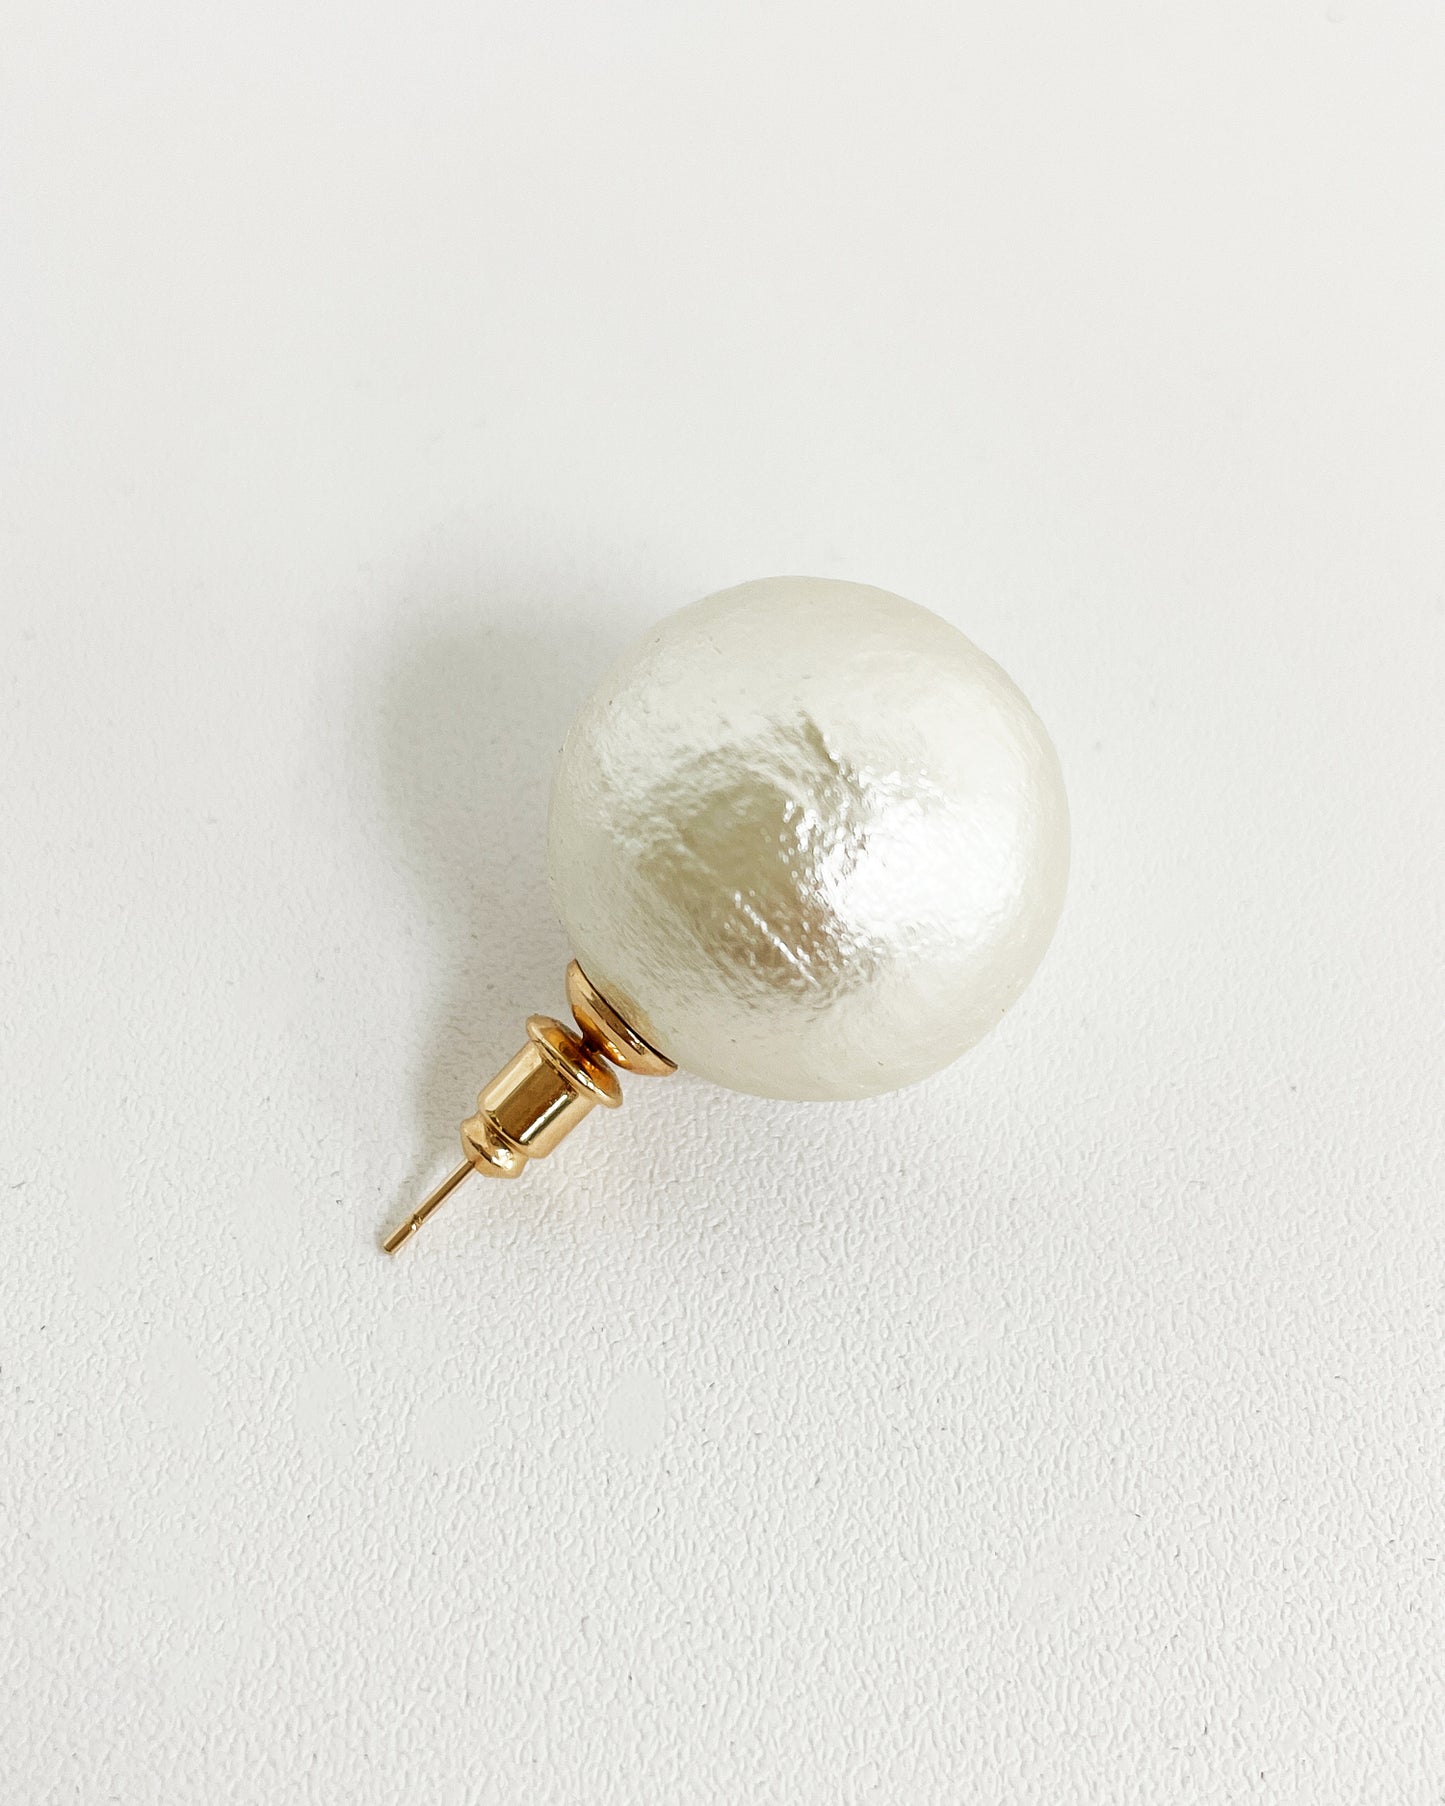 cotton pearl studded earrings *pre-order*